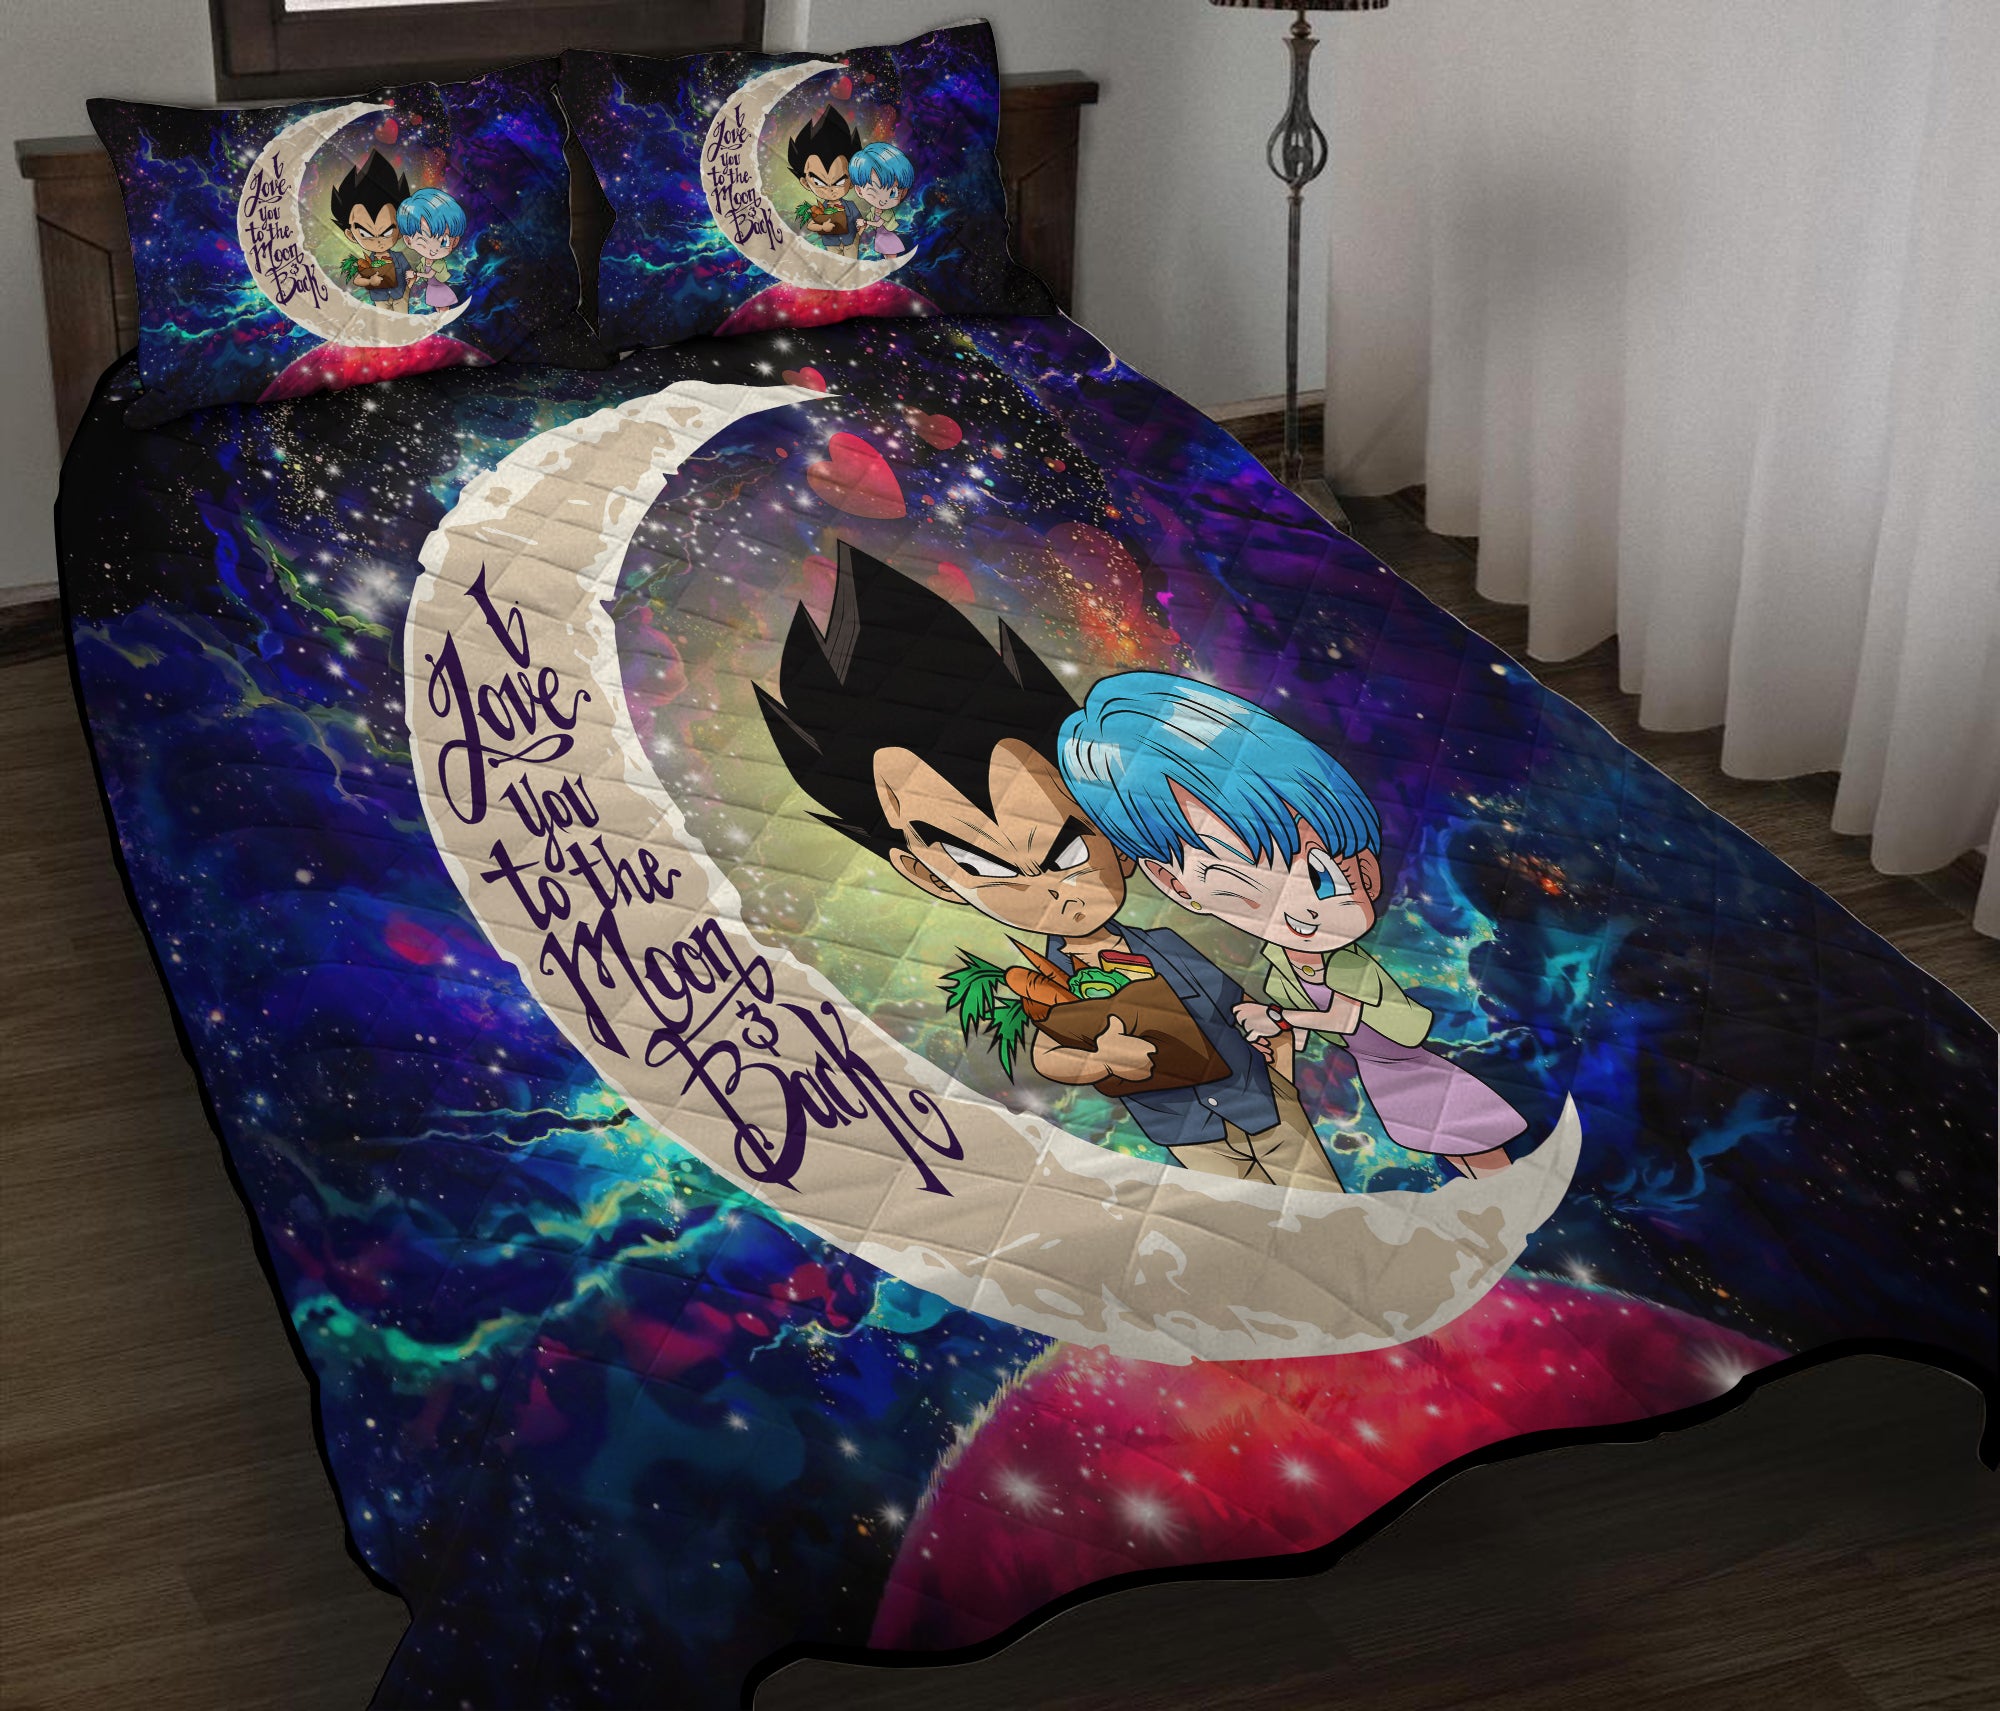 Vegeta And Bulma Dragon Ball Love You To The Moon Galaxy Quilt Bed Sets Nearkii